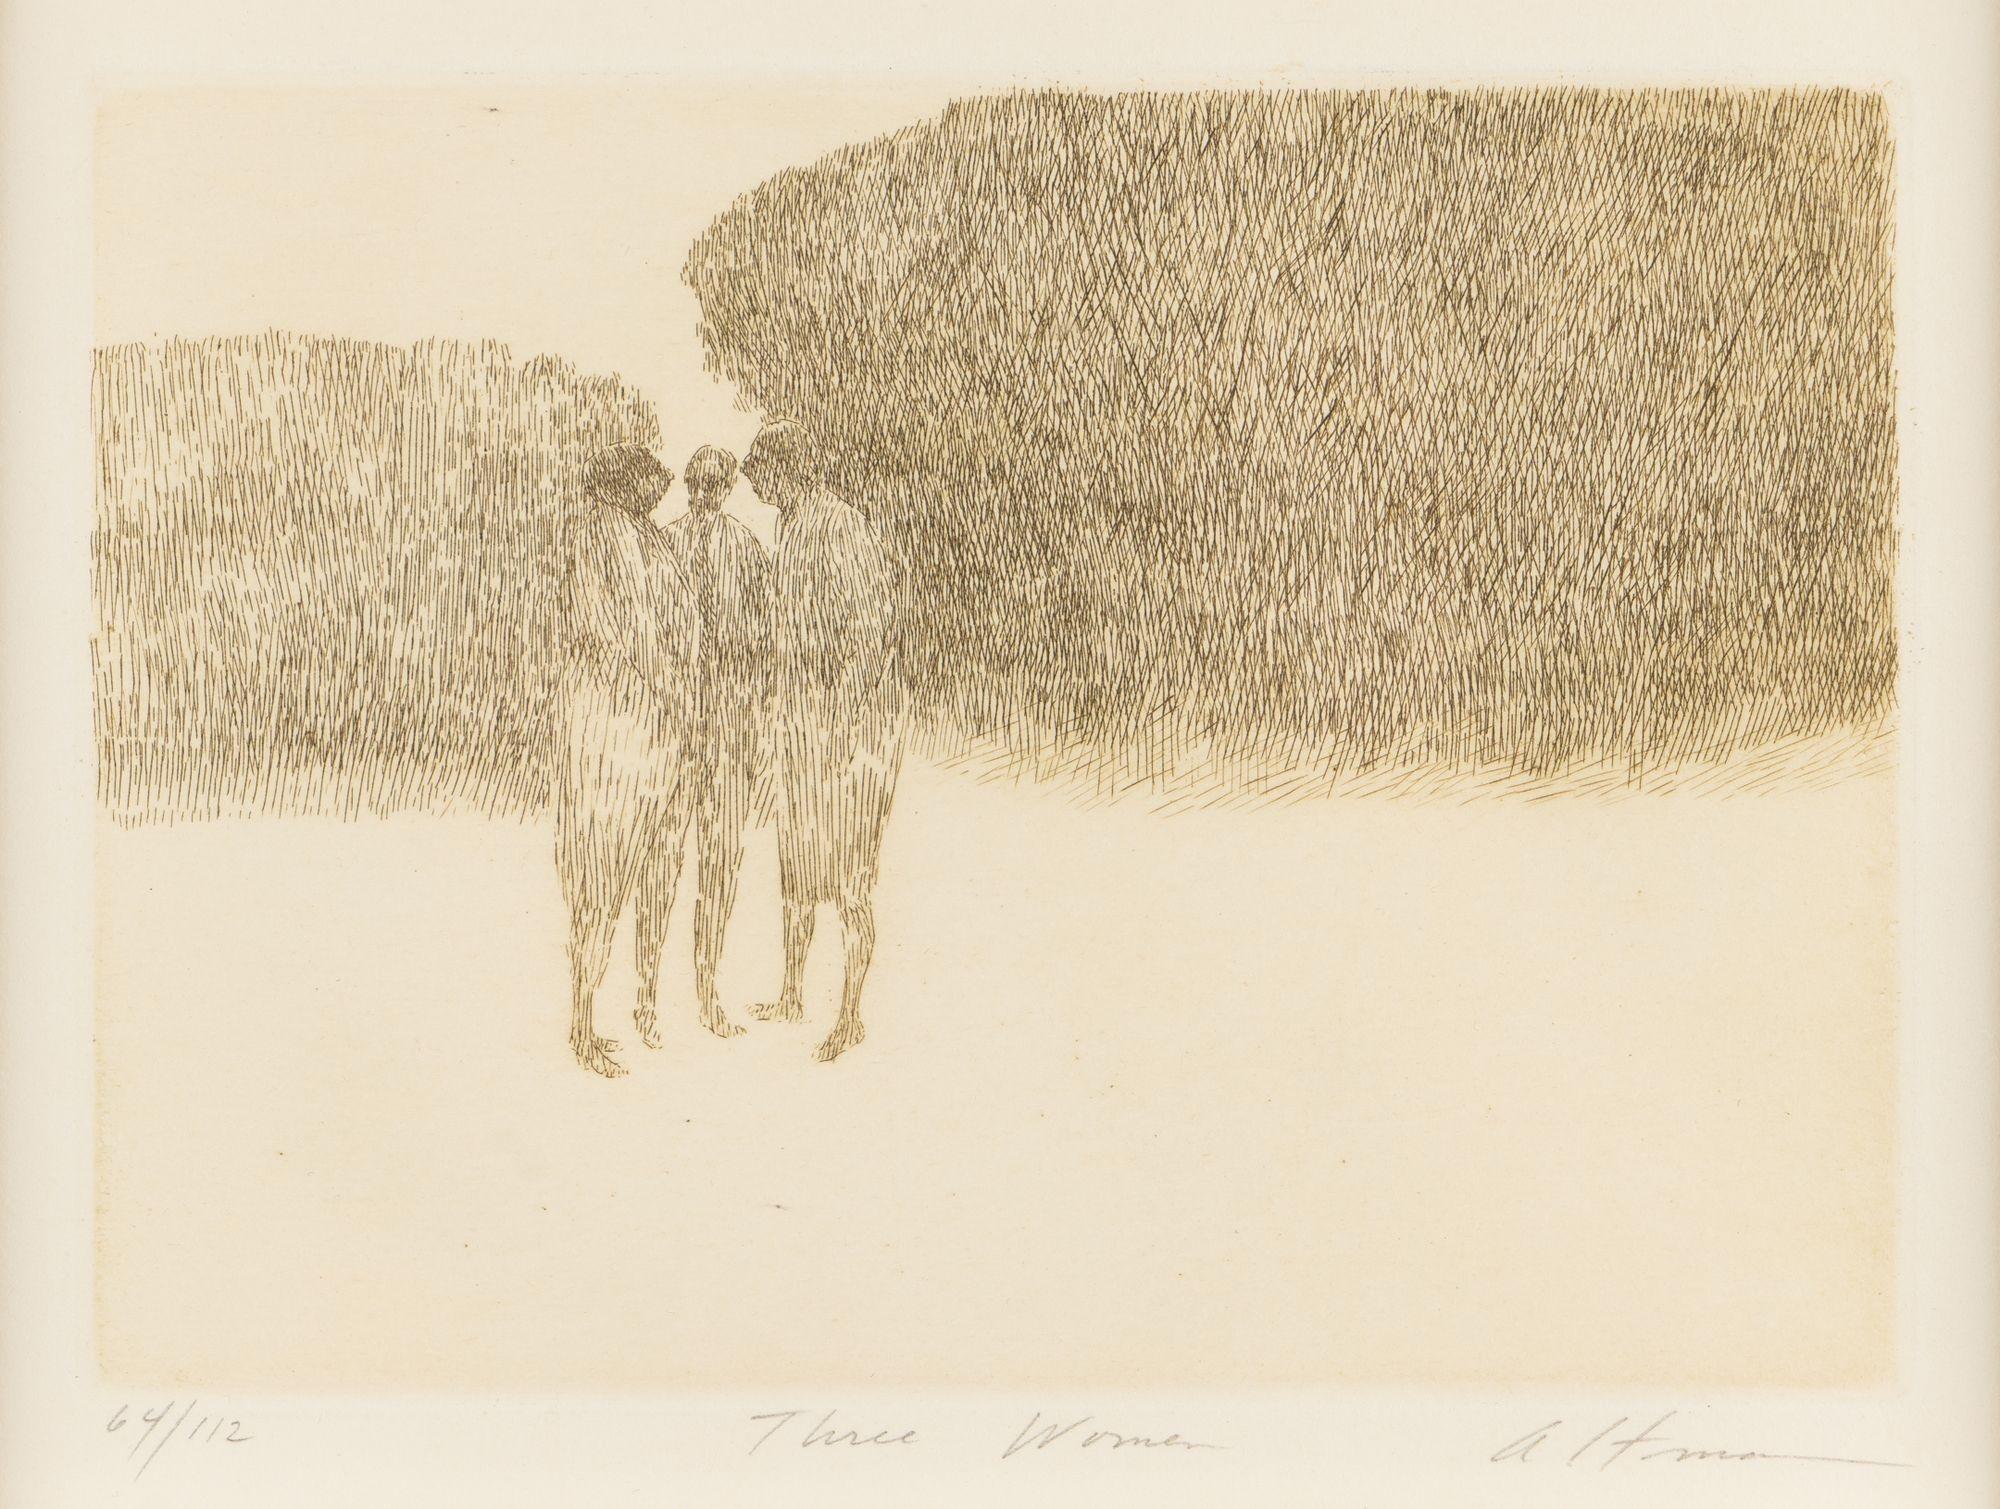 Engraving on paper from Altman's series of works centering on life in Central Park, New York City. The composition shows three women standing in close proximity to one another on a large, featureless foreground. The women are placed just below the